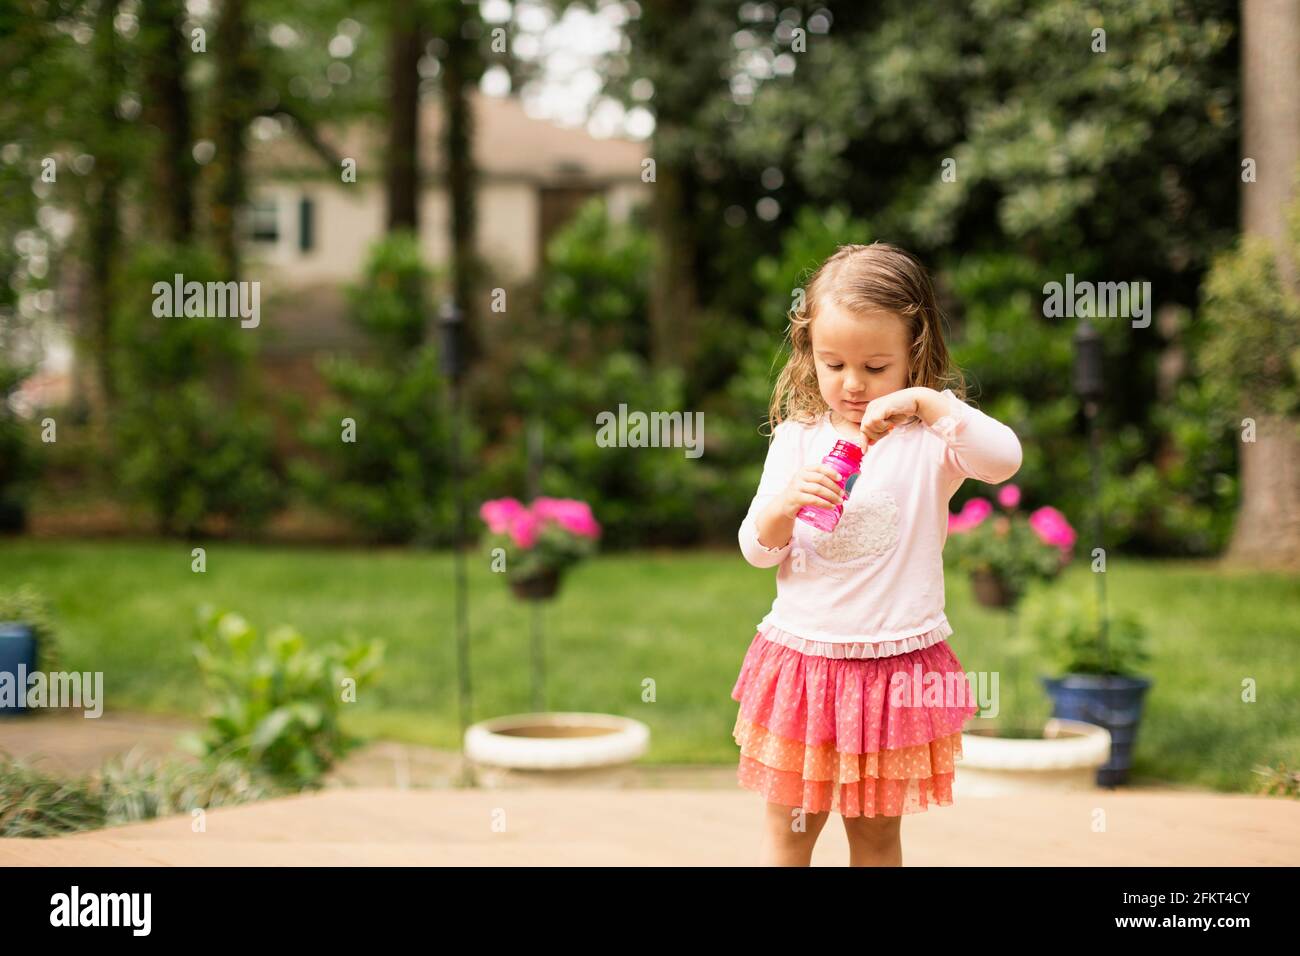 Female toddler preparing to blow bubbles in garden Stock Photo